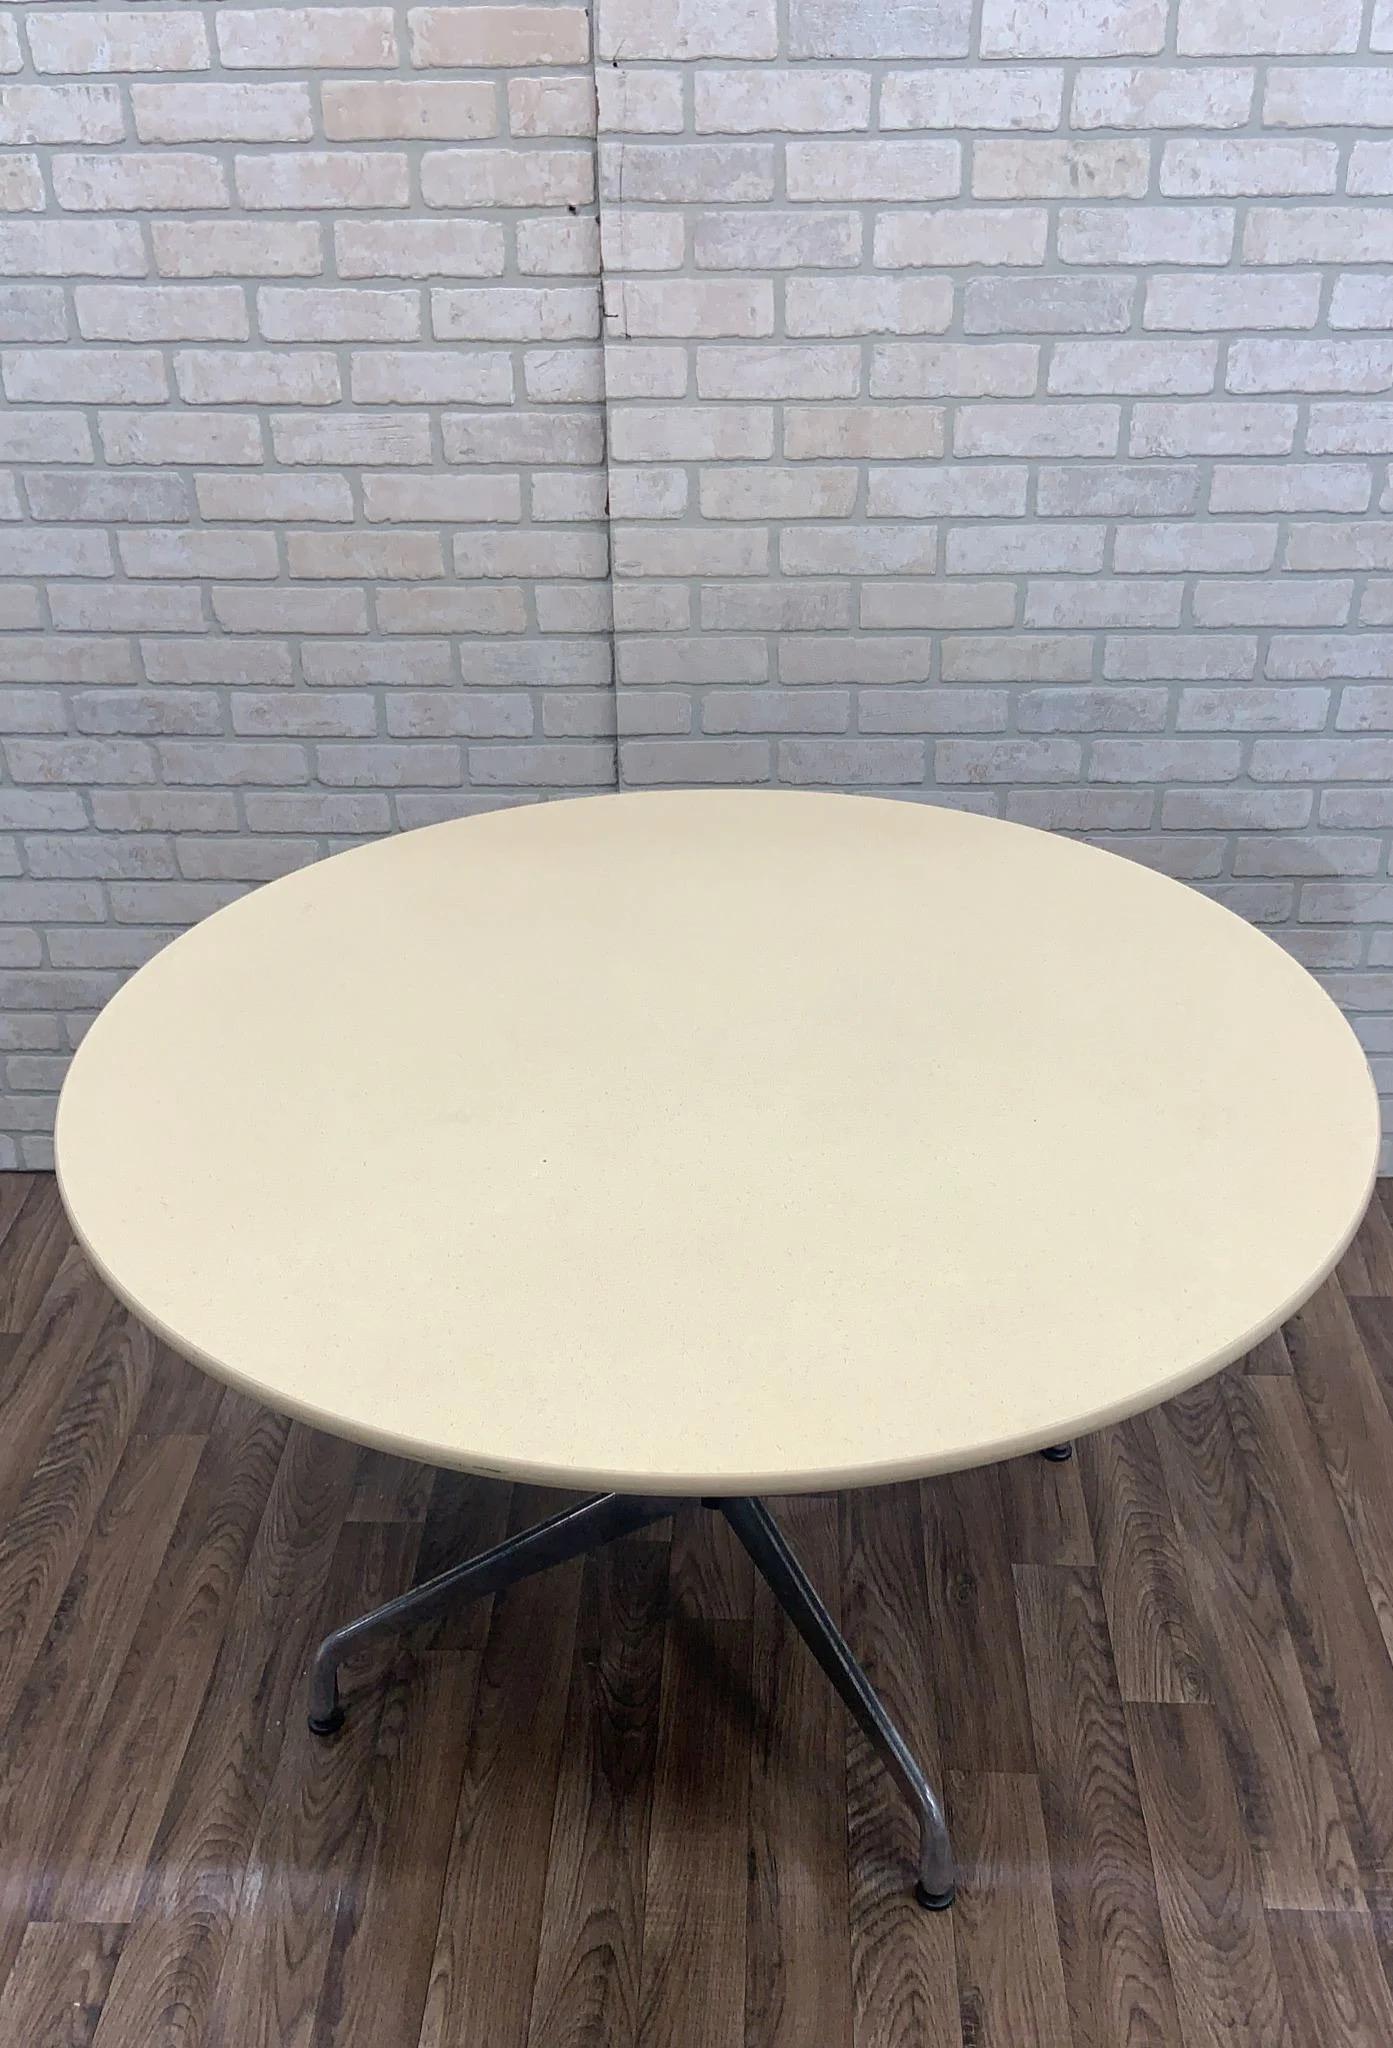 Mid Century Modern Herman Miller 48” Dining Table

This dining table is a timeless piece that effortlessly combines elegance and functionality. Crafted with a cream top and chrome pedestal stand, this round dining table exudes a classic mid century